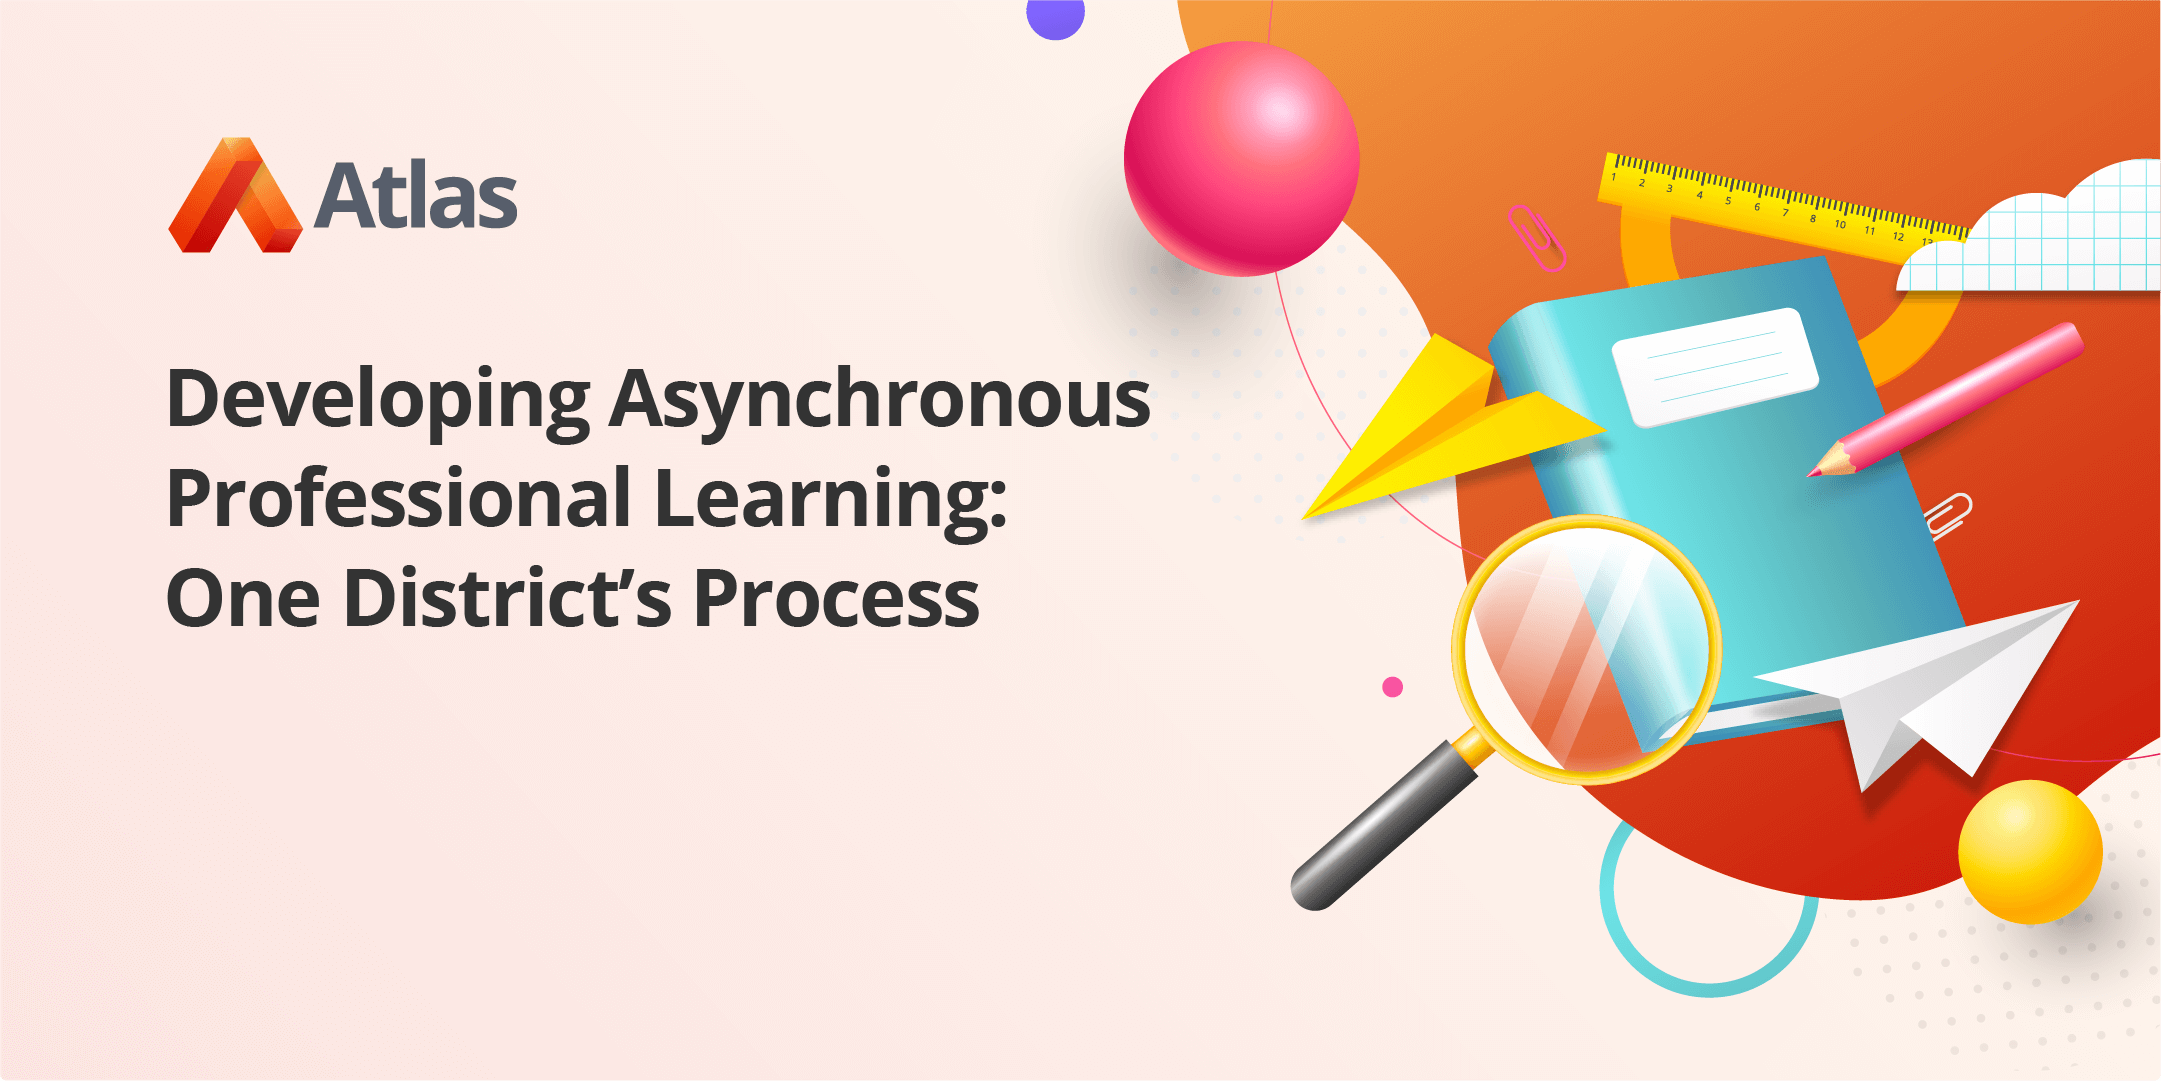 Developing Asynchronous Professional Learning: One District’s Process